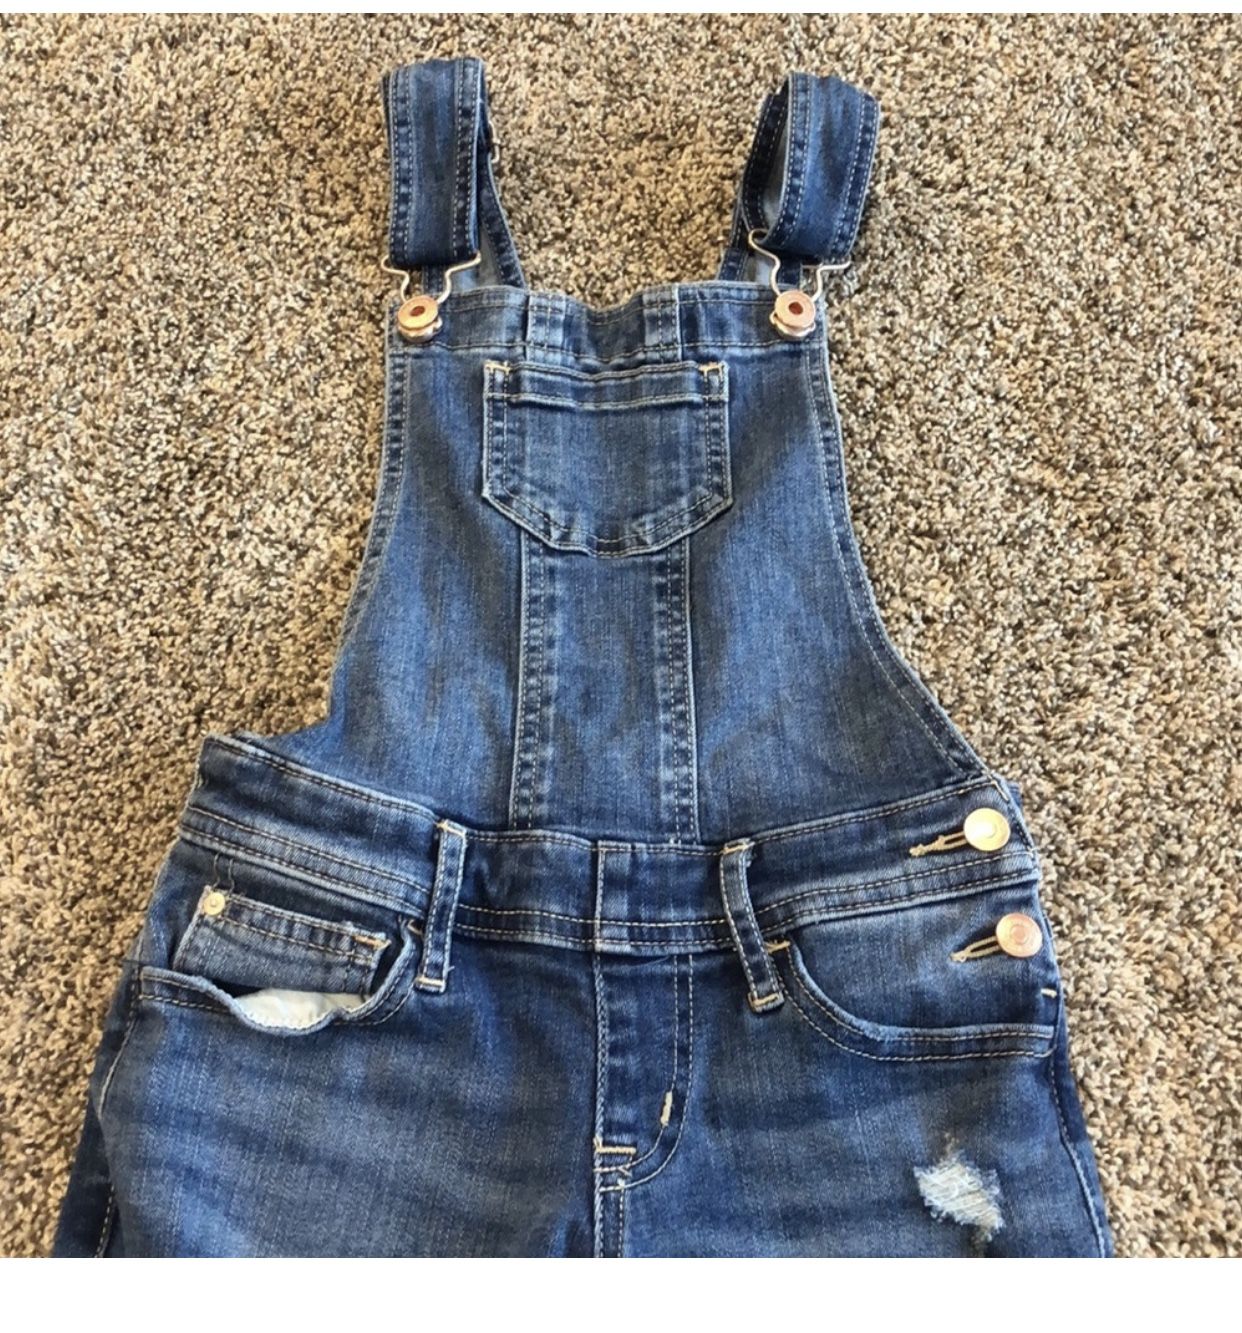 Abercrombie Overall Kids 5/6 distressed overalls